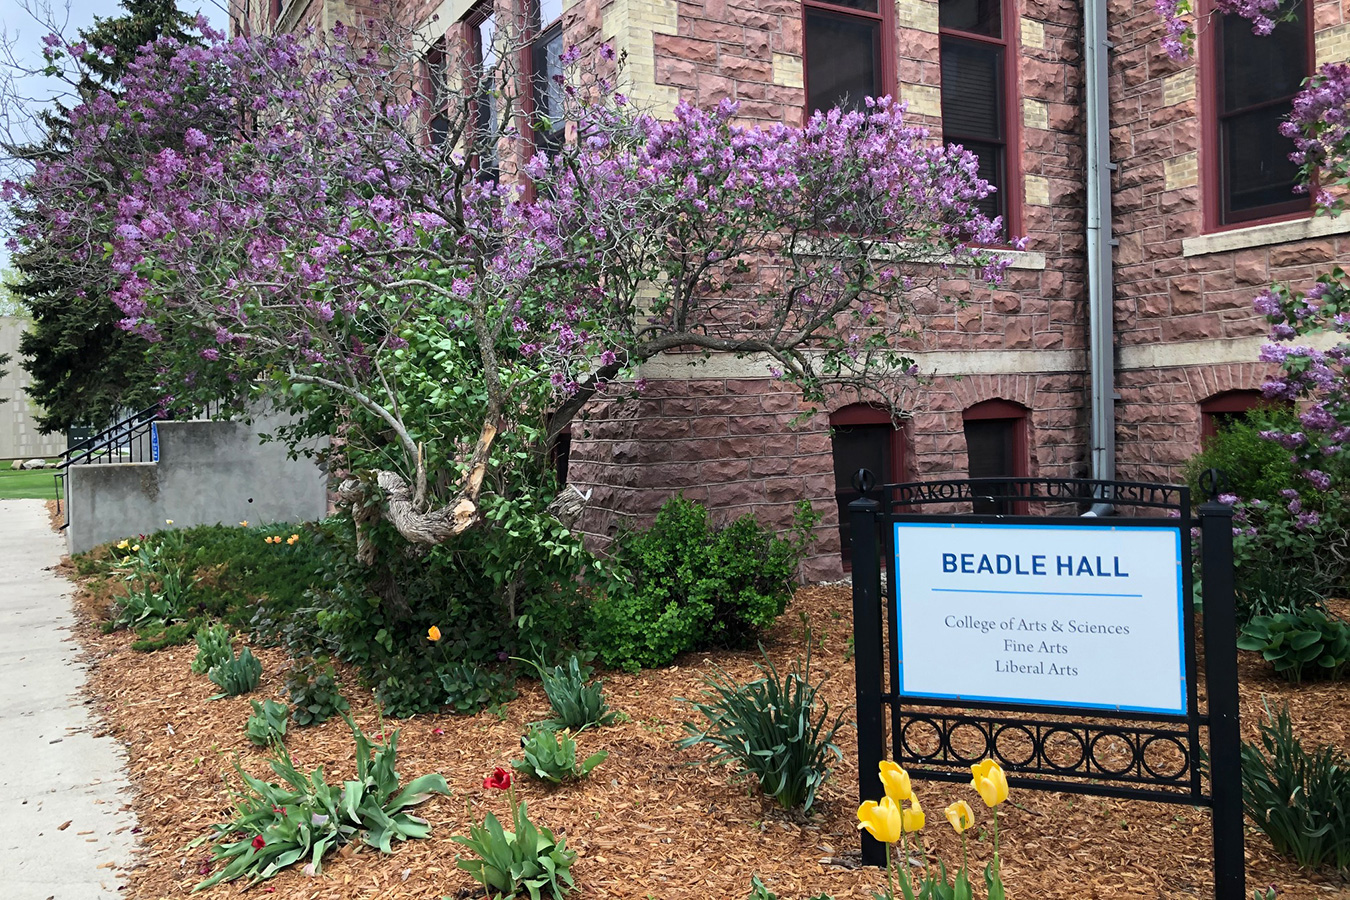 Beadle Hall landscape in the spring